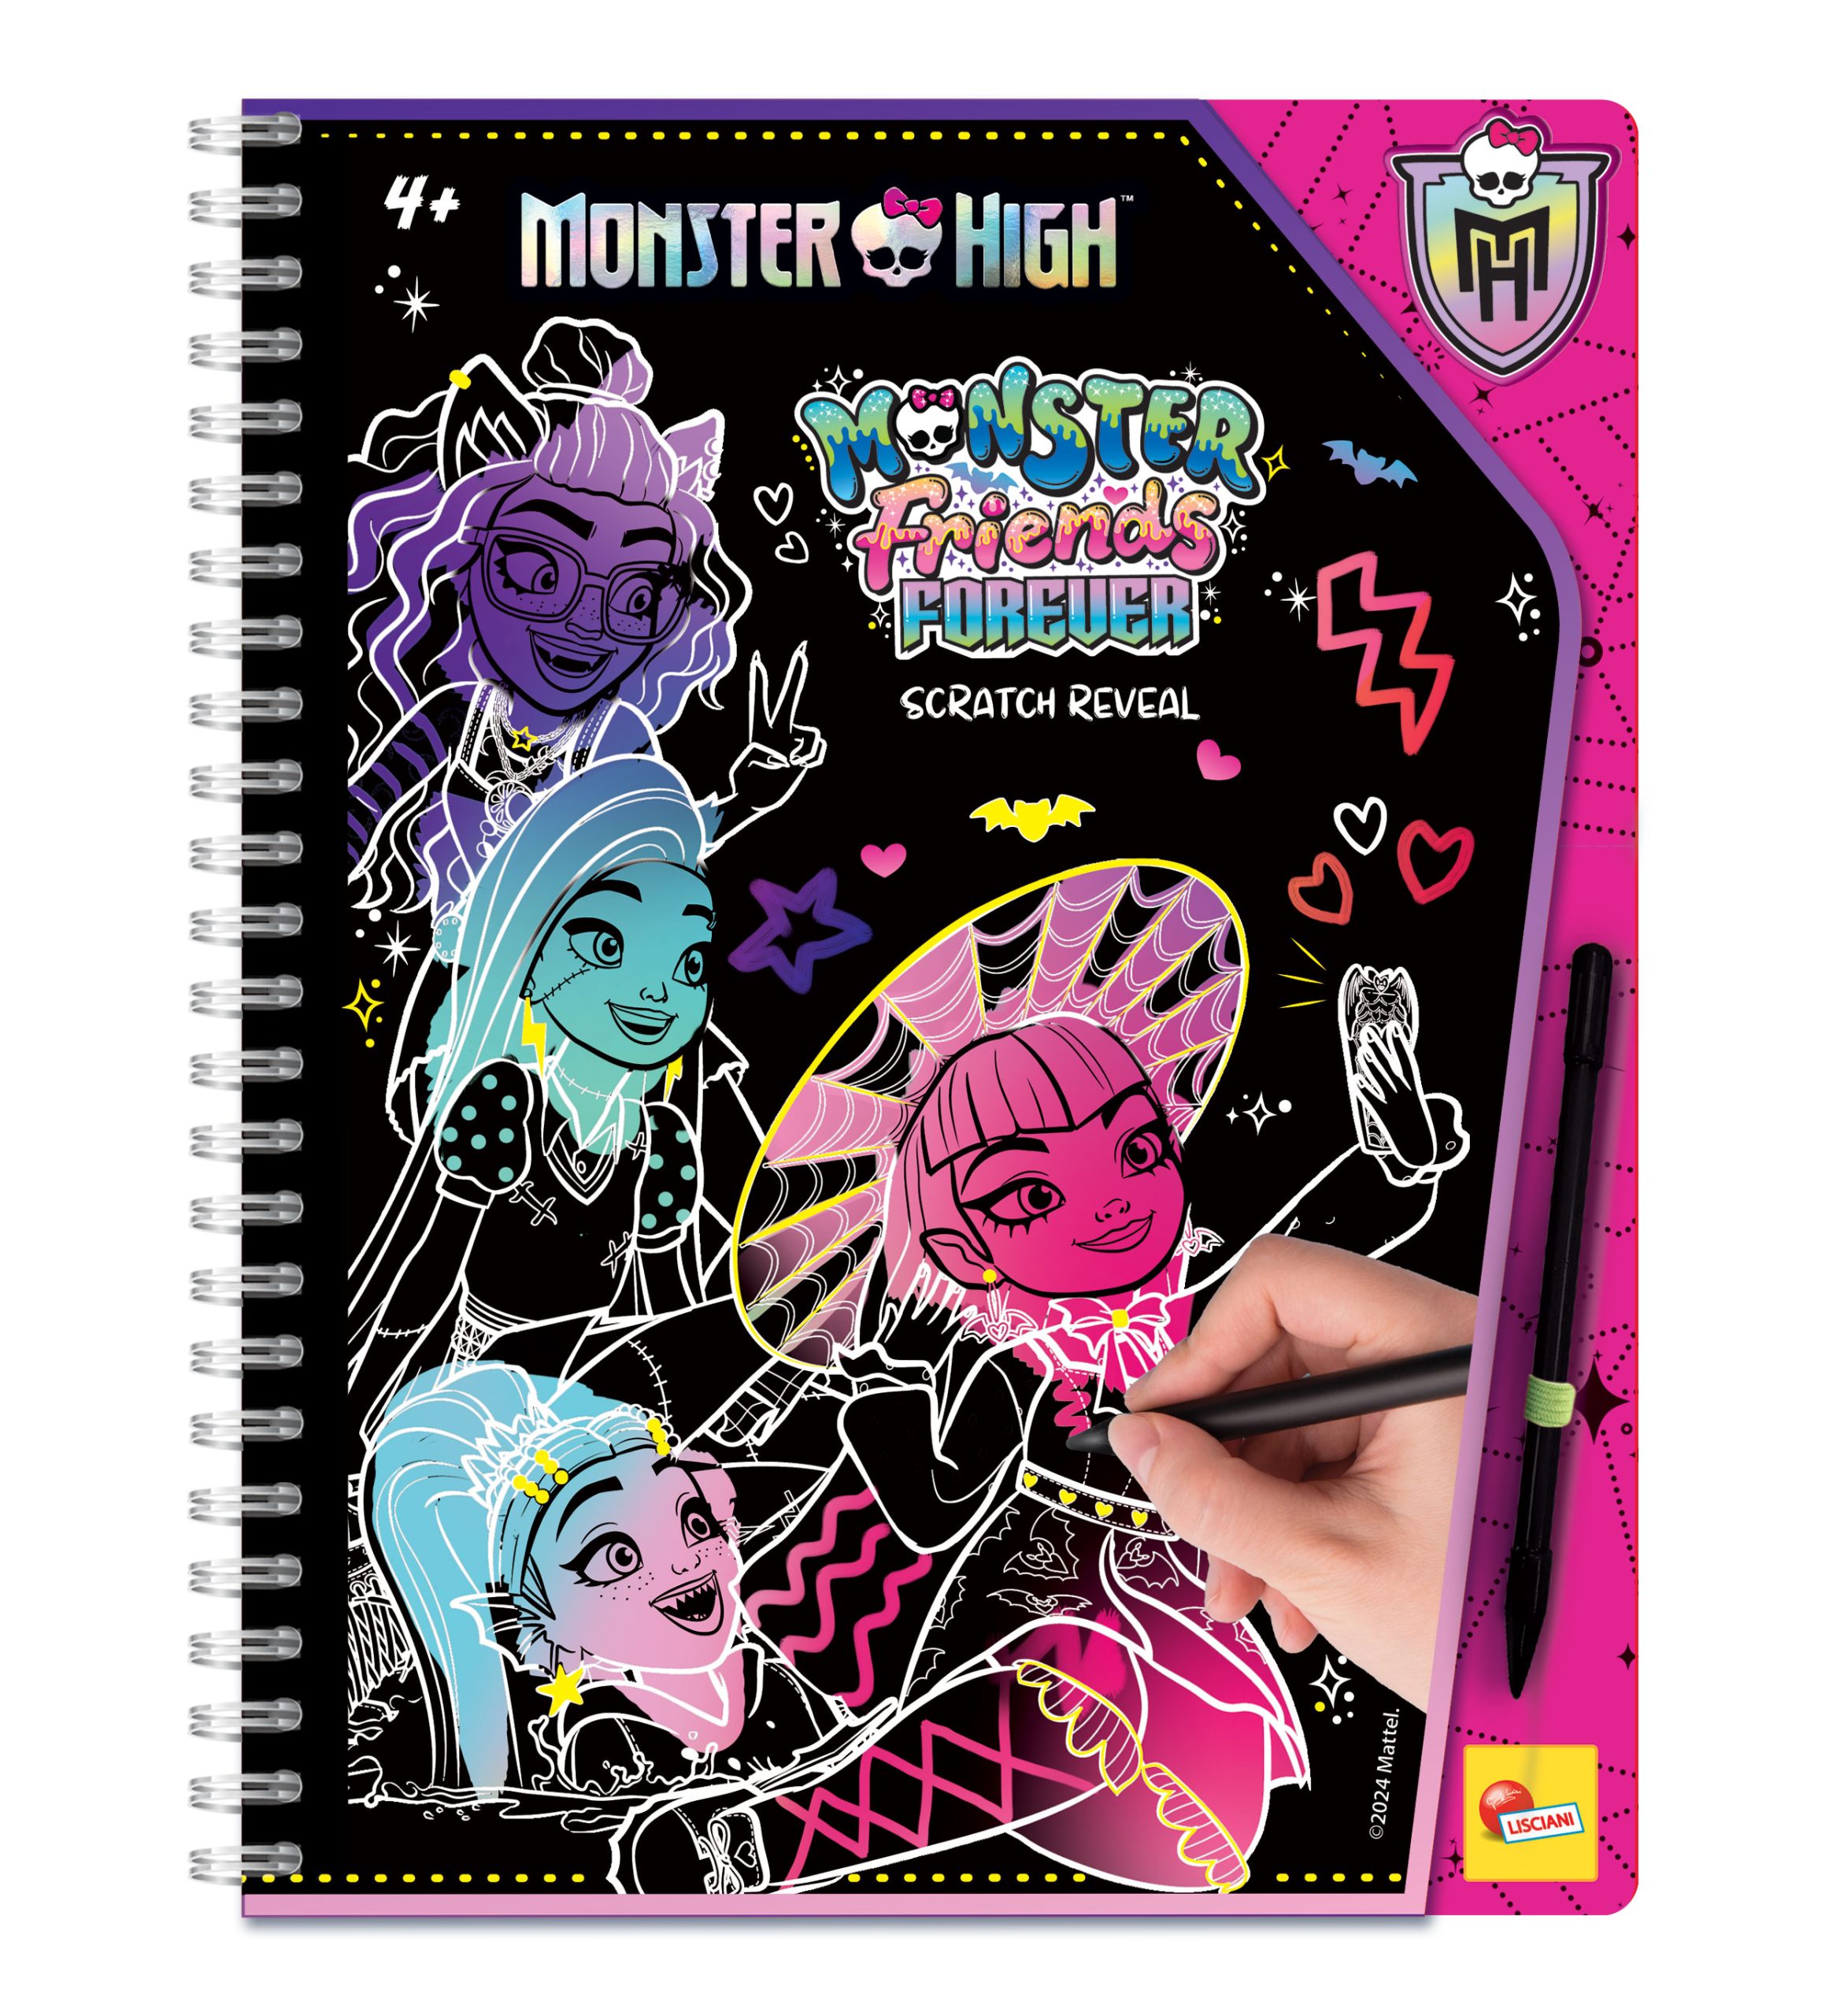 Photo 1 of the game MONSTER HIGH SKETCHBOOK MONSTER FRIENDS FOREVER SCRATCH REVEAL IN DISPLAY 12